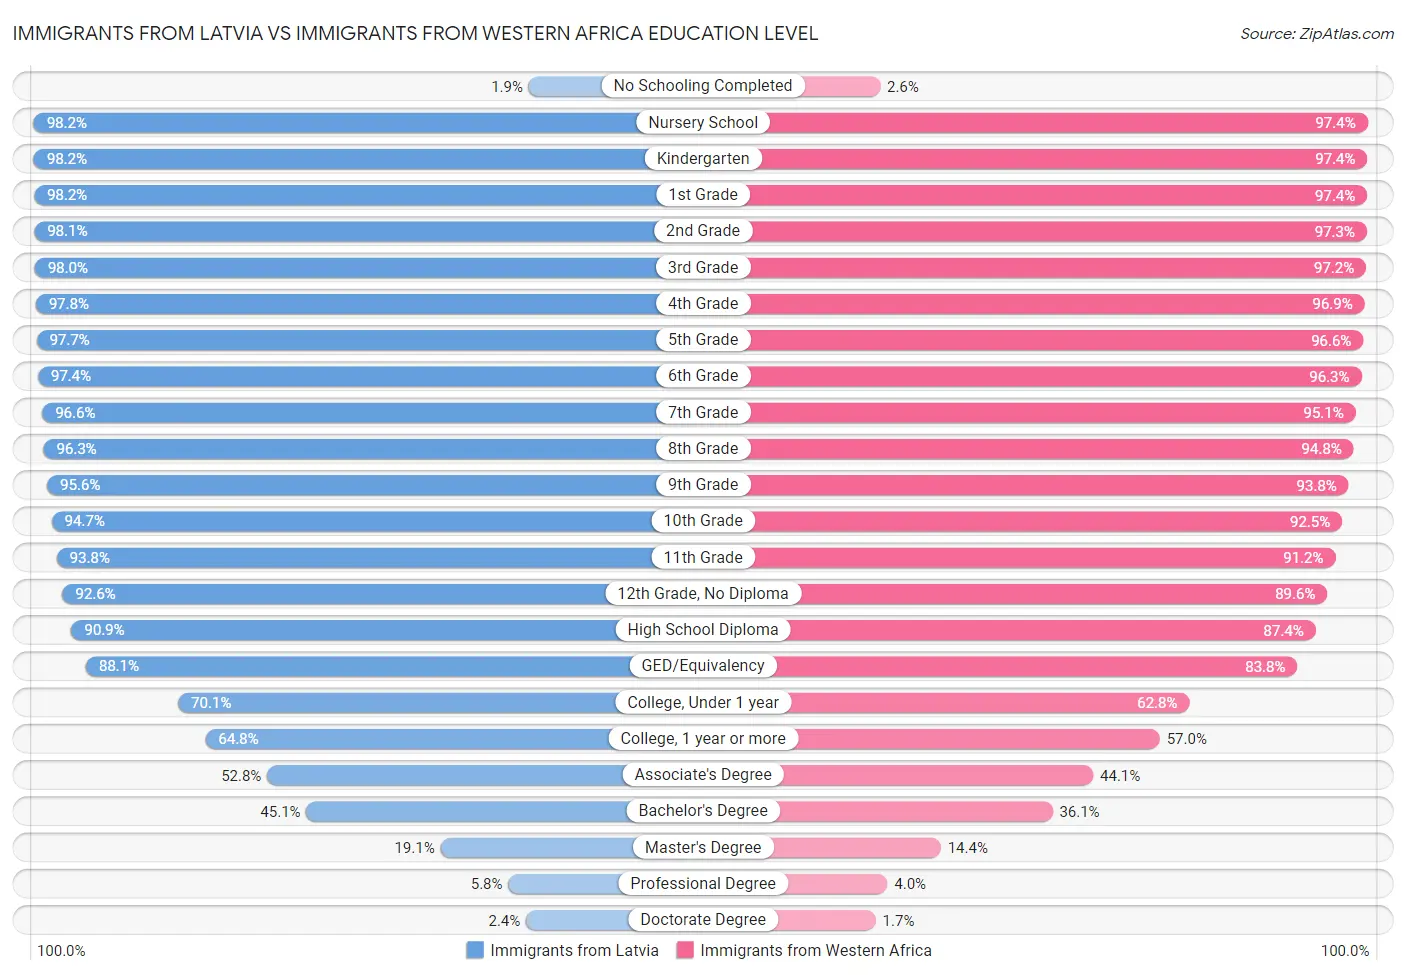 Immigrants from Latvia vs Immigrants from Western Africa Education Level